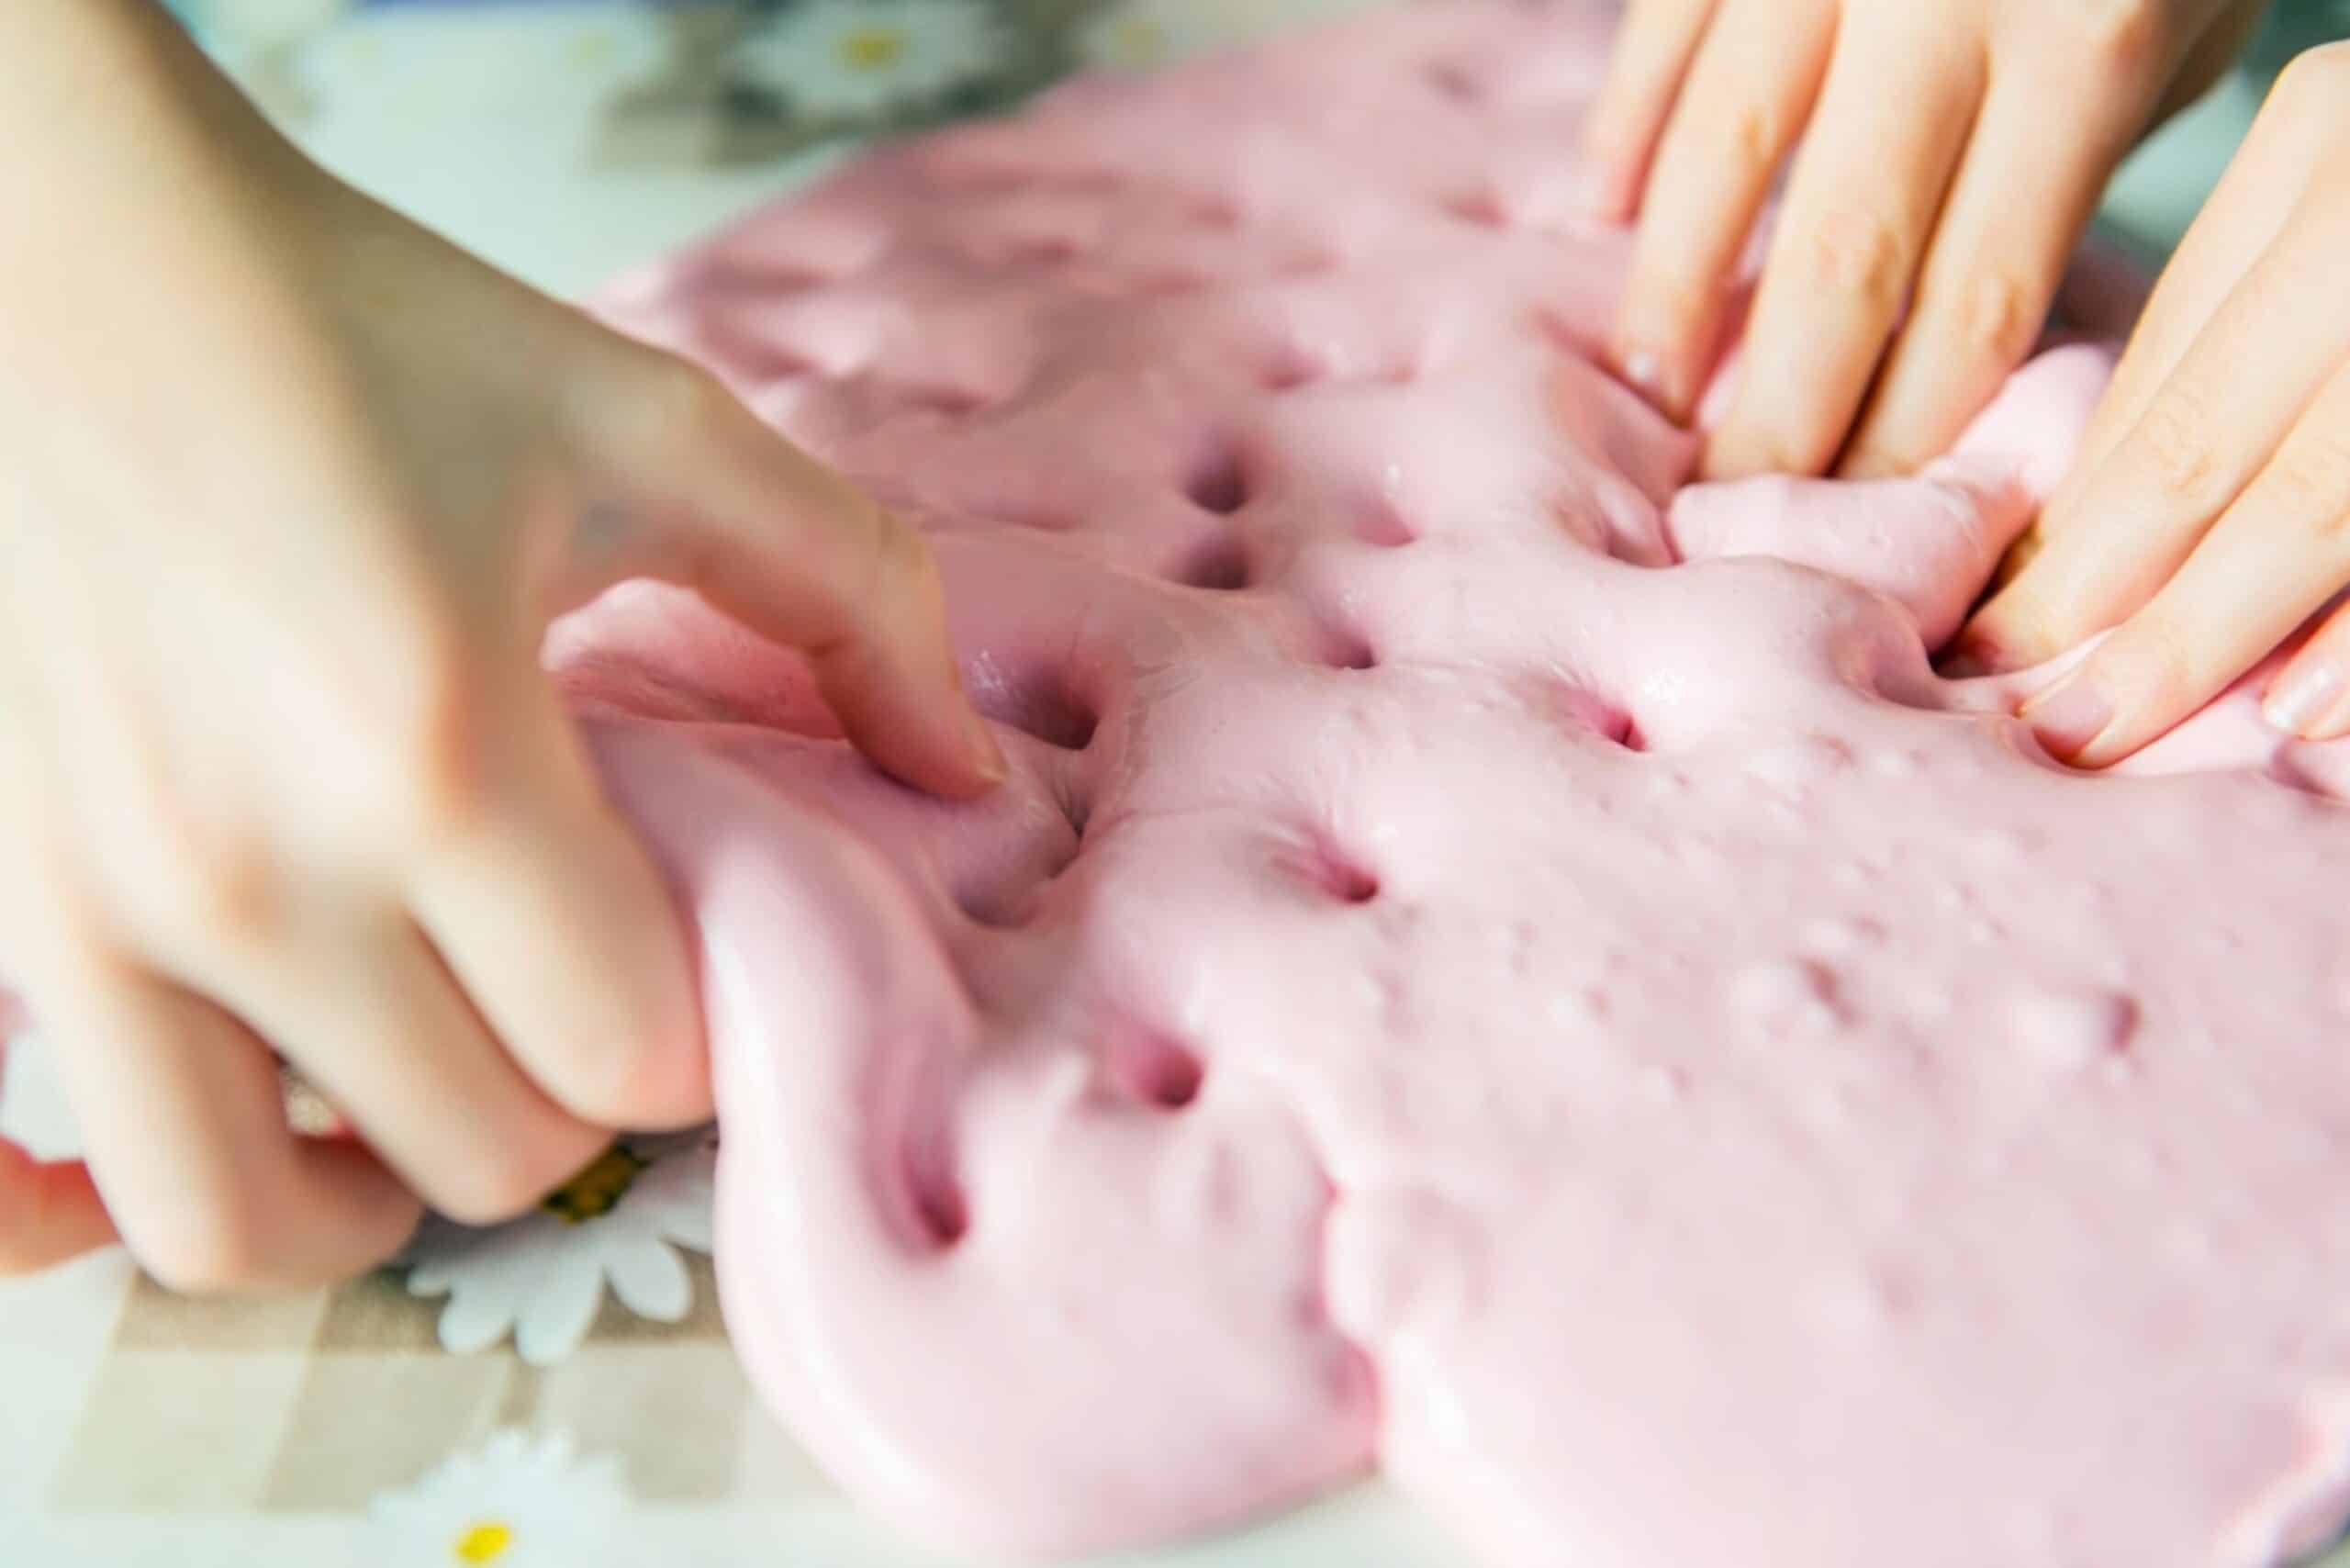 How to Get Slime Out of Clothes Tidyhere Image of a Kids Playing with Pink Slime